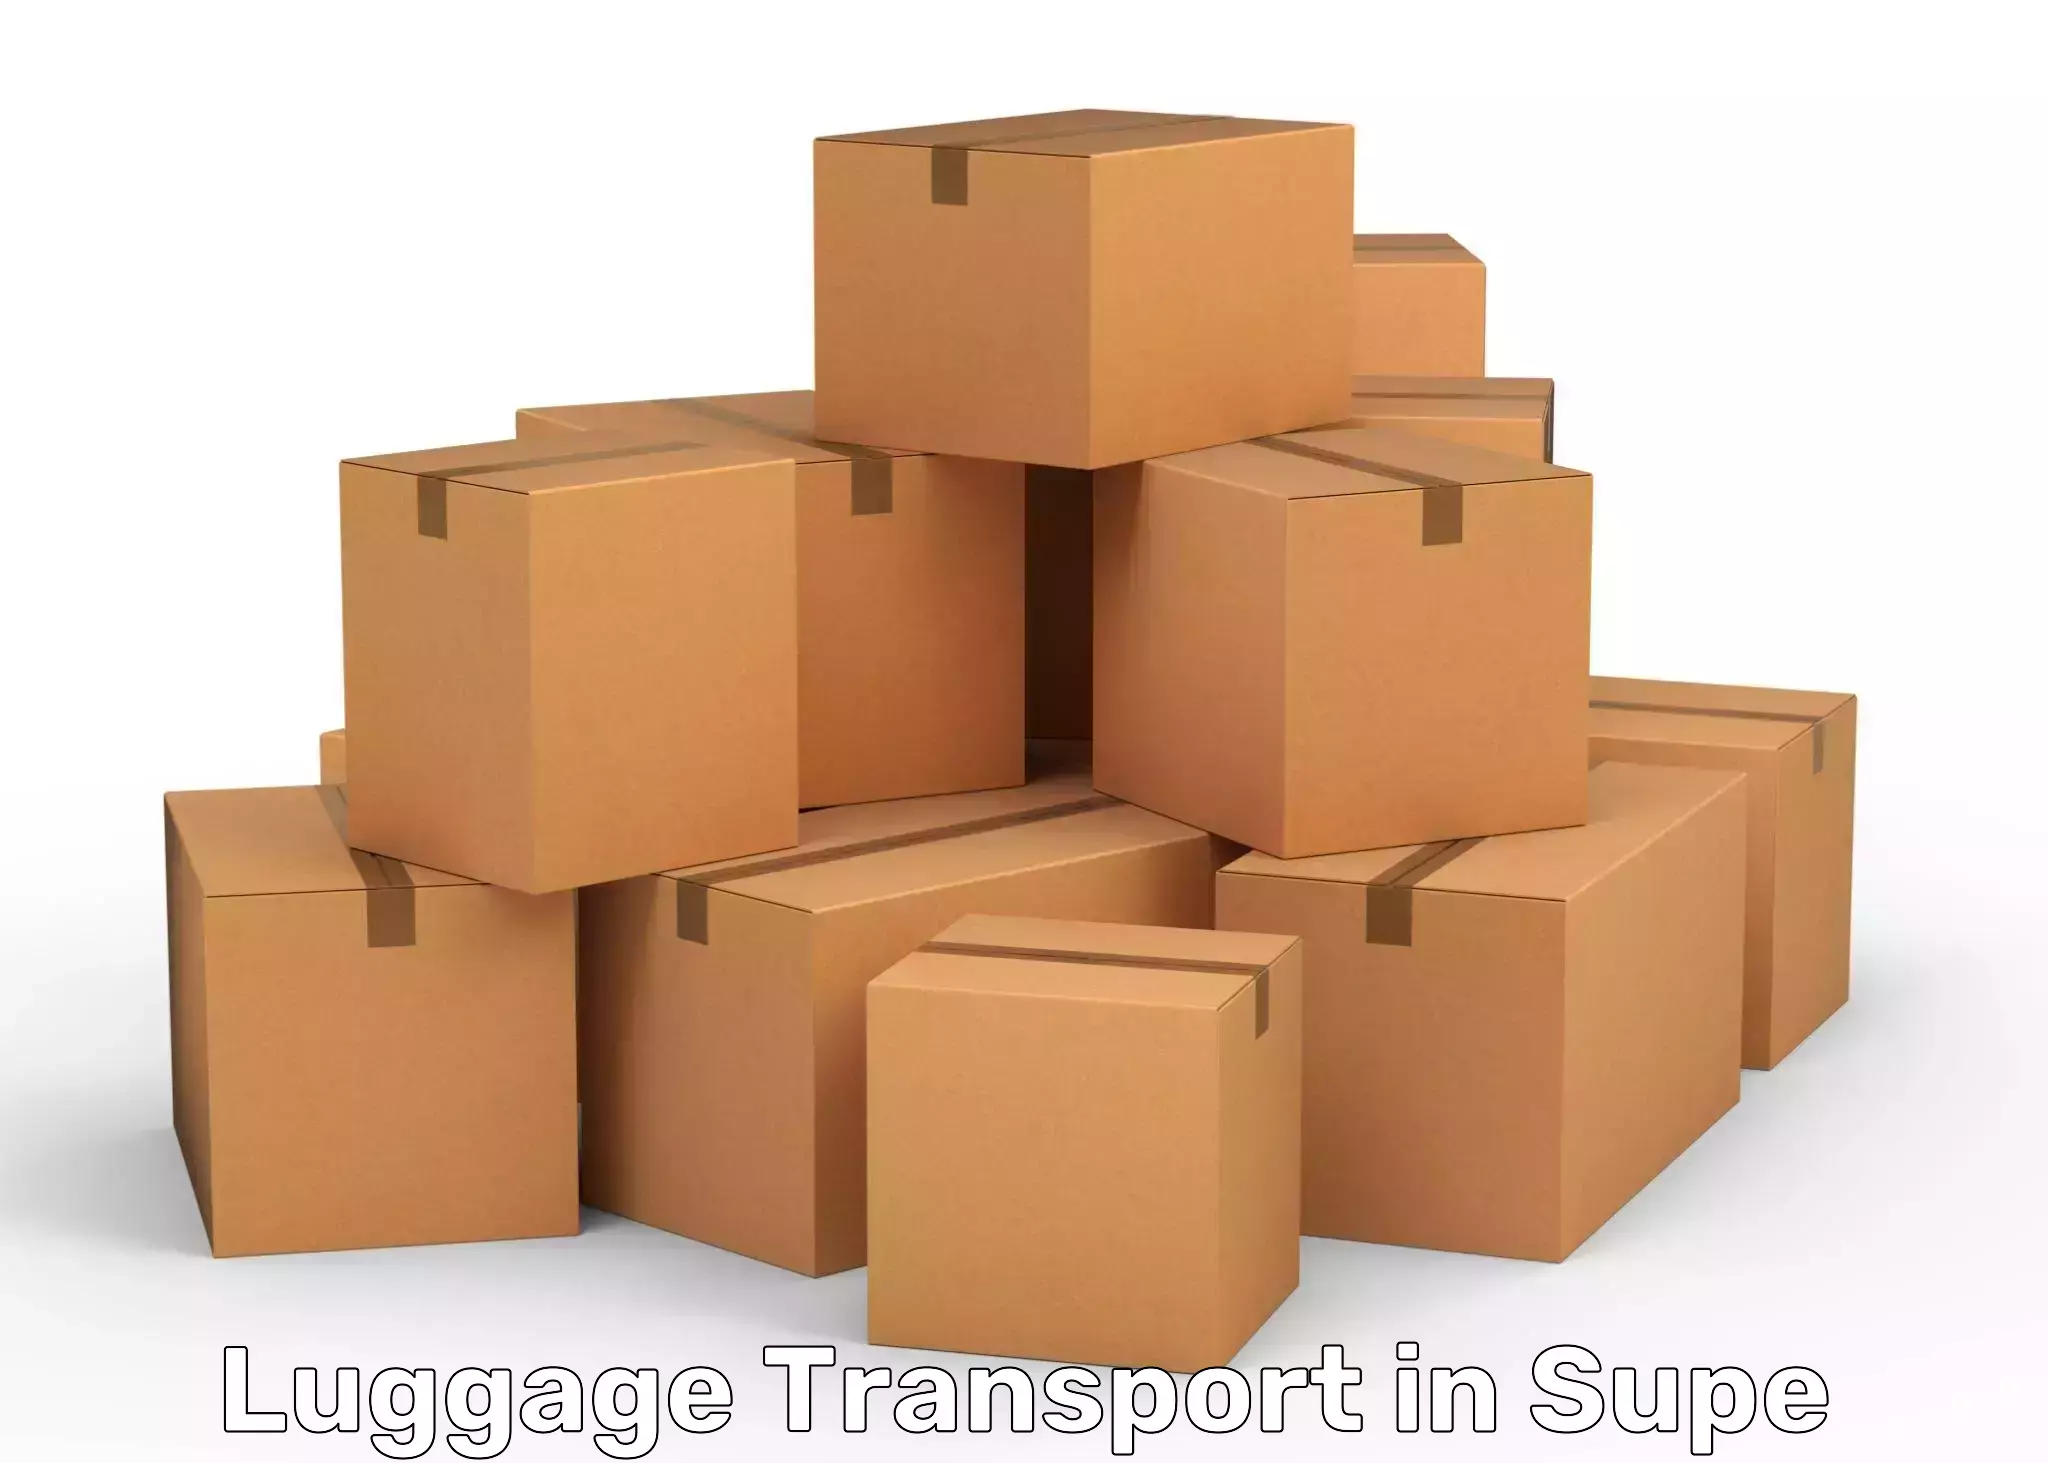 Baggage transport scheduler in Supe